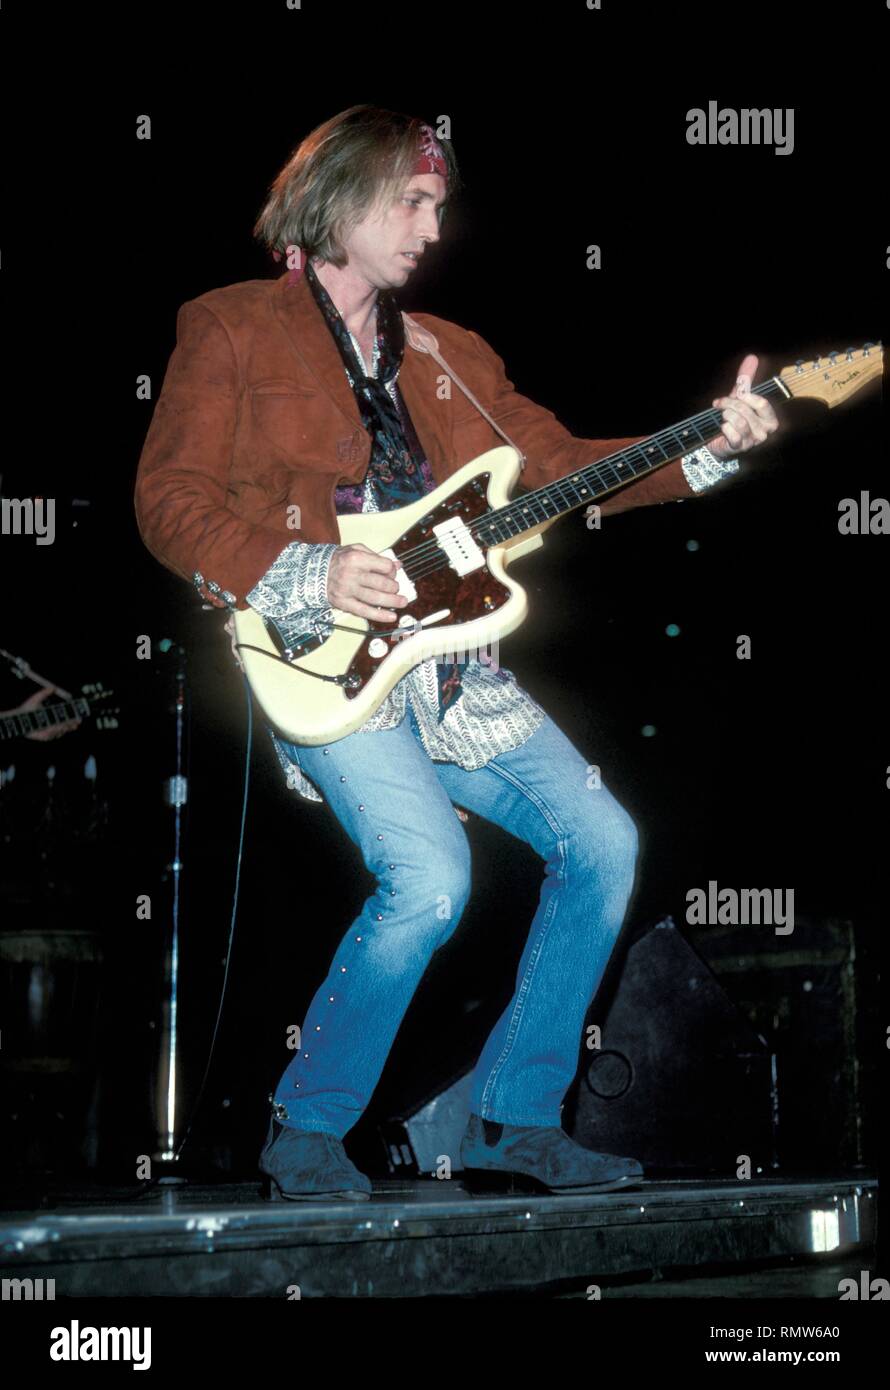 Singer, songwriter and multi-instrumentalist Tom Petty is shown performing on stage during a 'live' concert appearance. Stock Photo